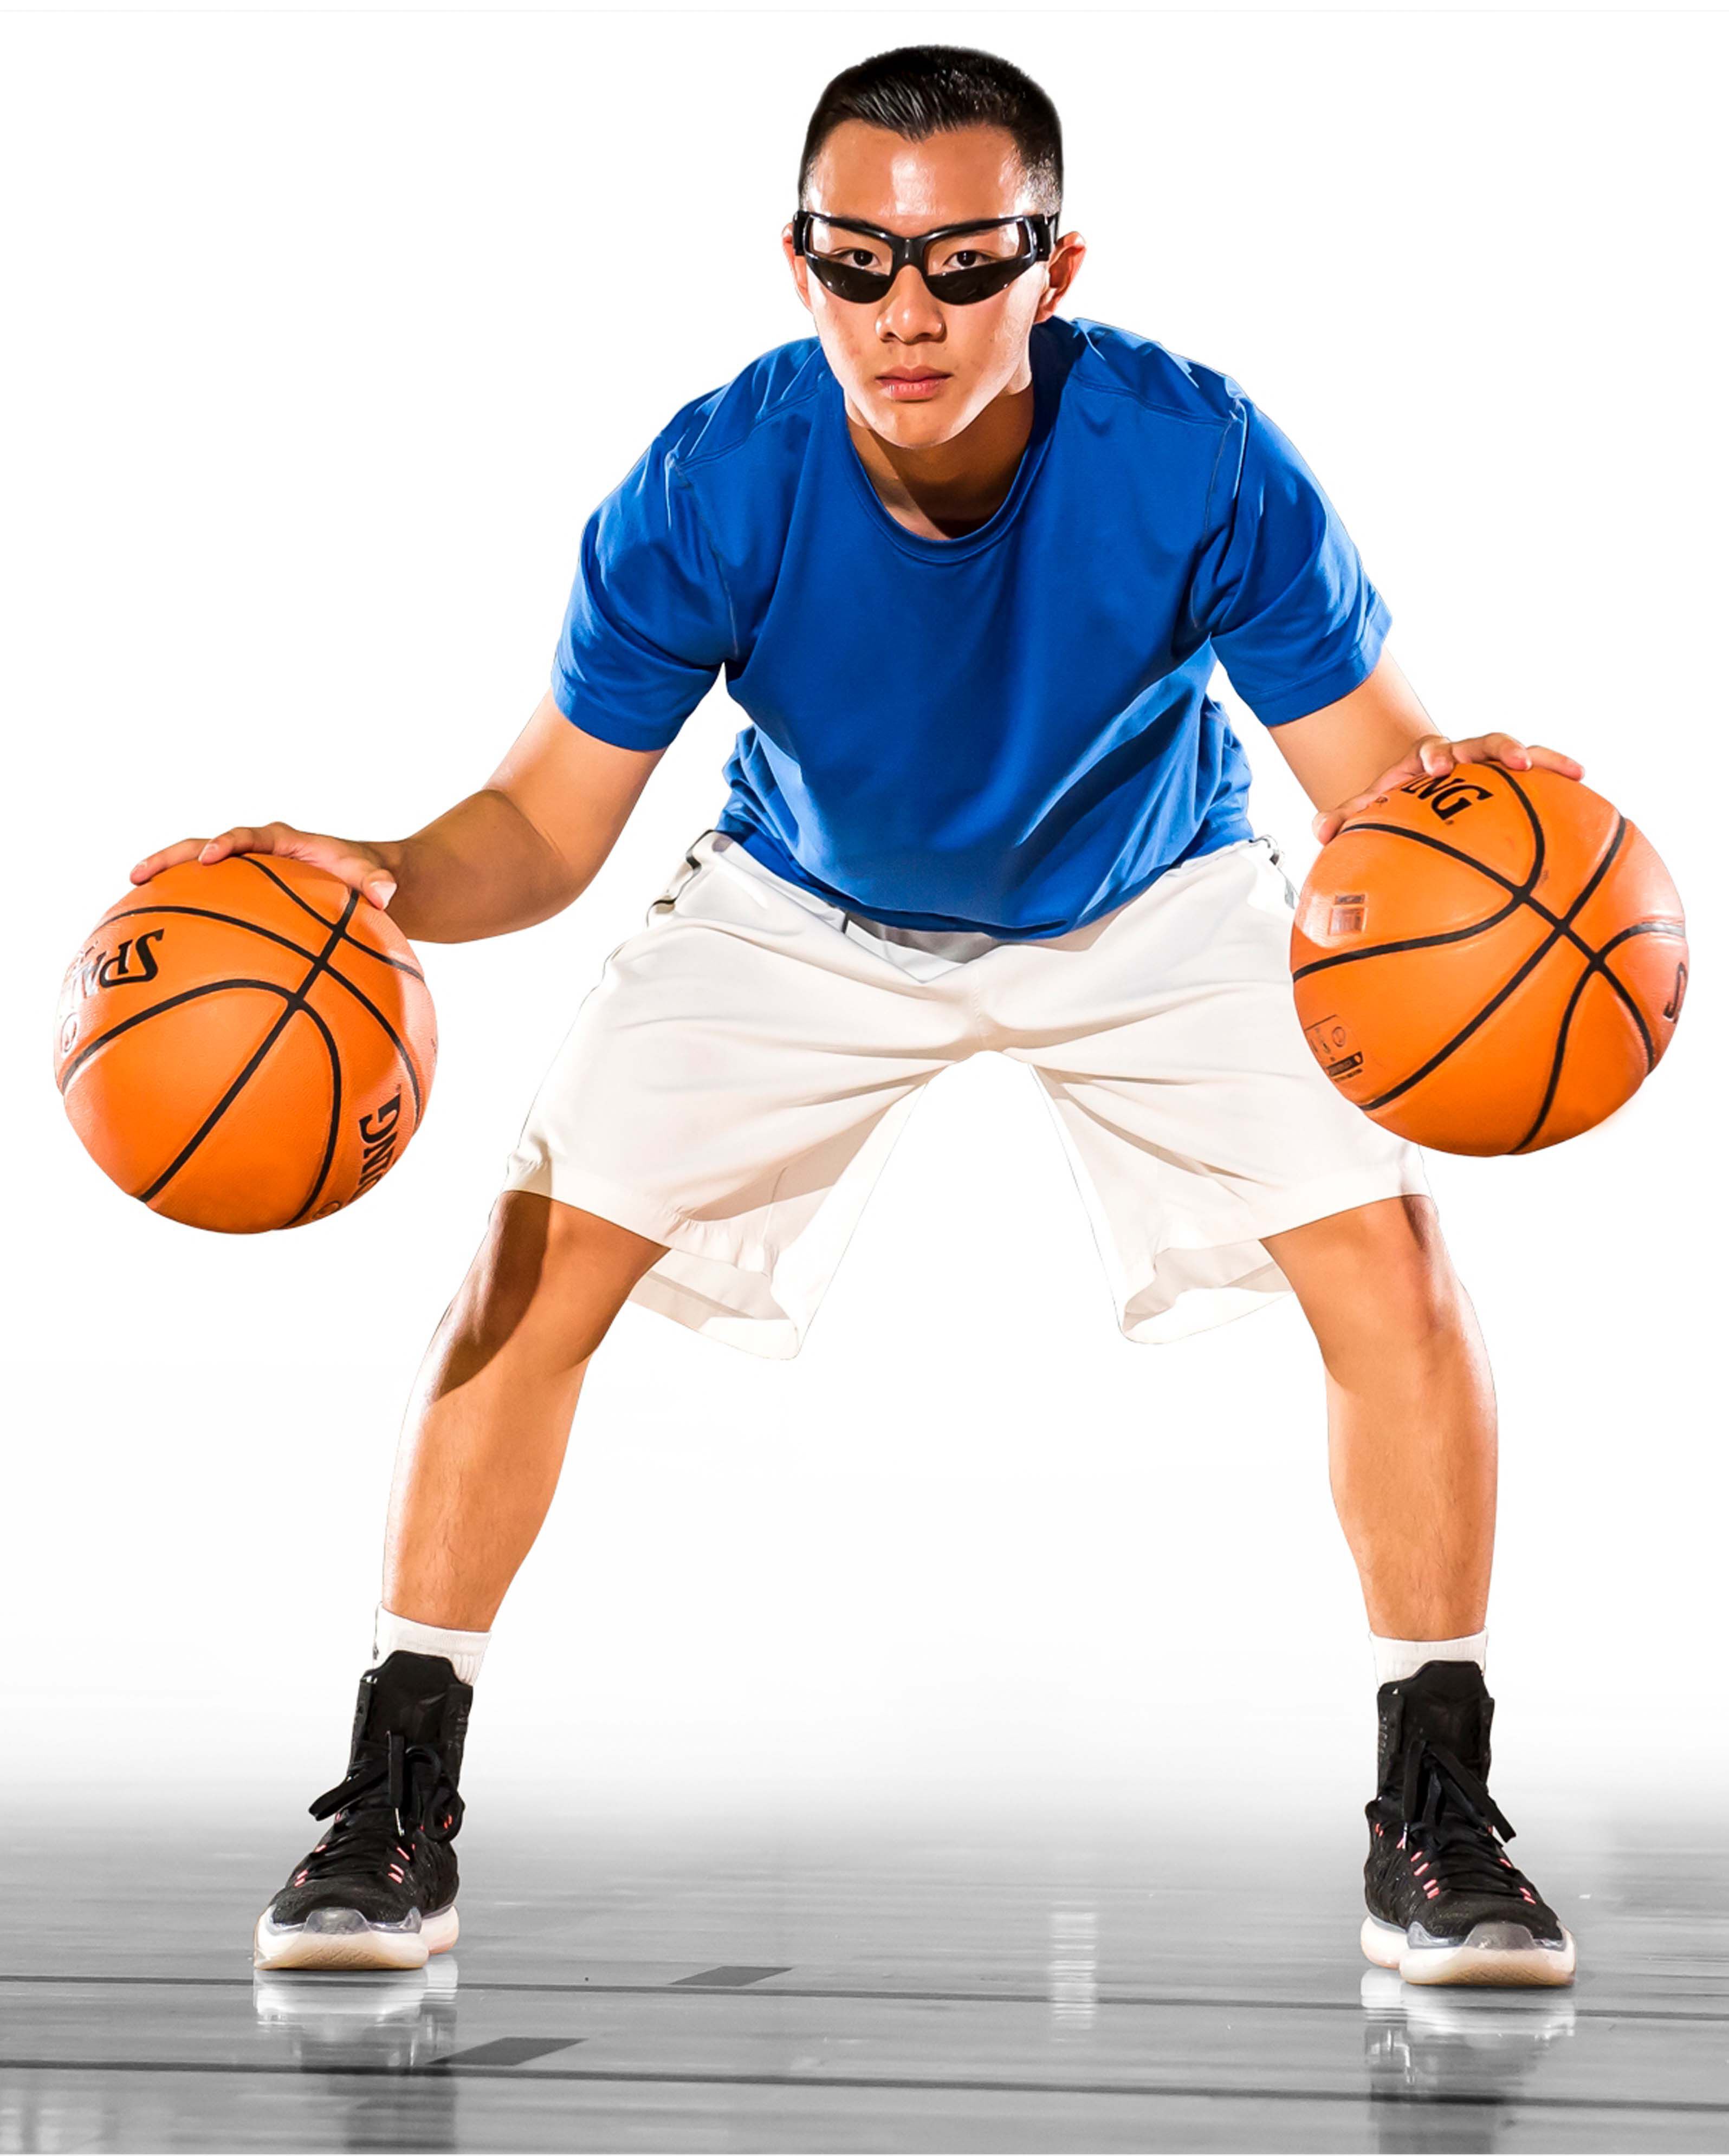 Cosmos Sports Basketball Dribble Specs Goggles No Look Dribbling Goggles for Team Training Aid Black Color 